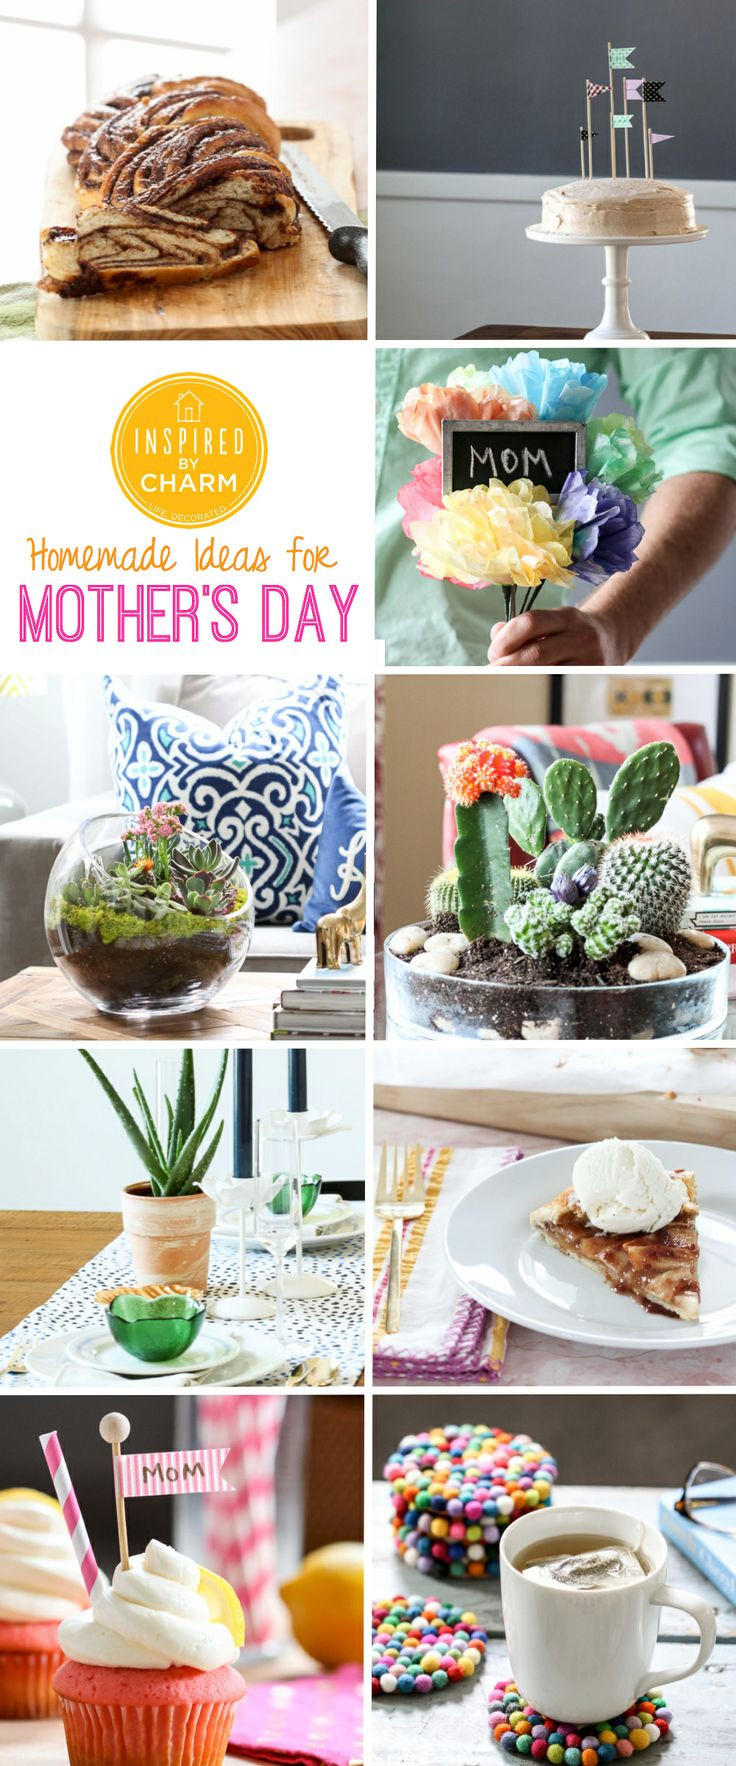 Unique Mother'S Day Gift Ideas
 25 unique Ideas for mothers day ideas on Pinterest